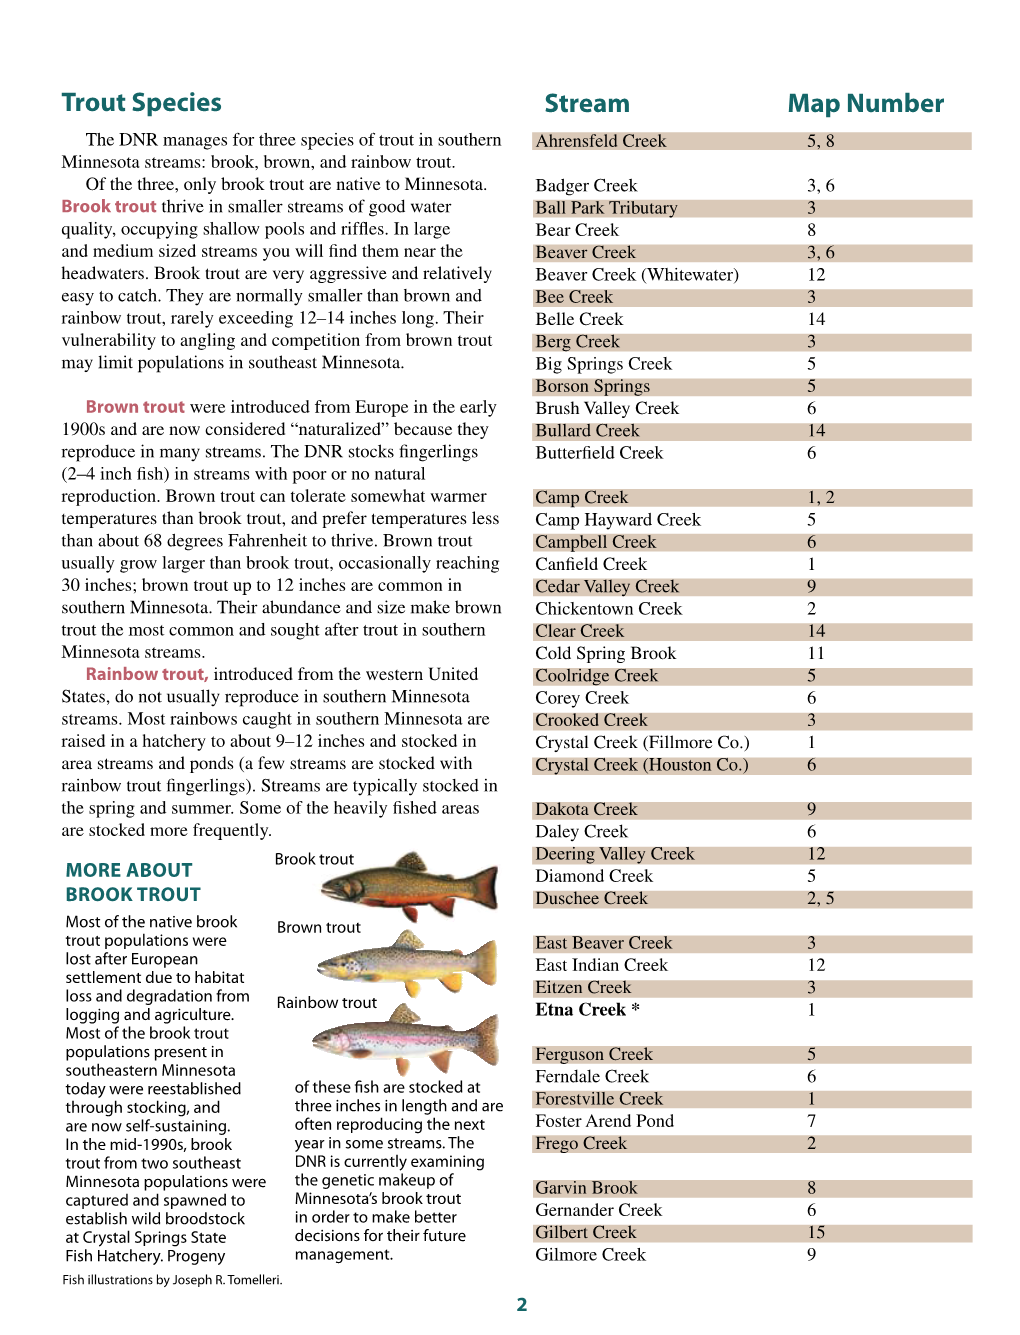 South East Minnesota Trout Streem Map Index